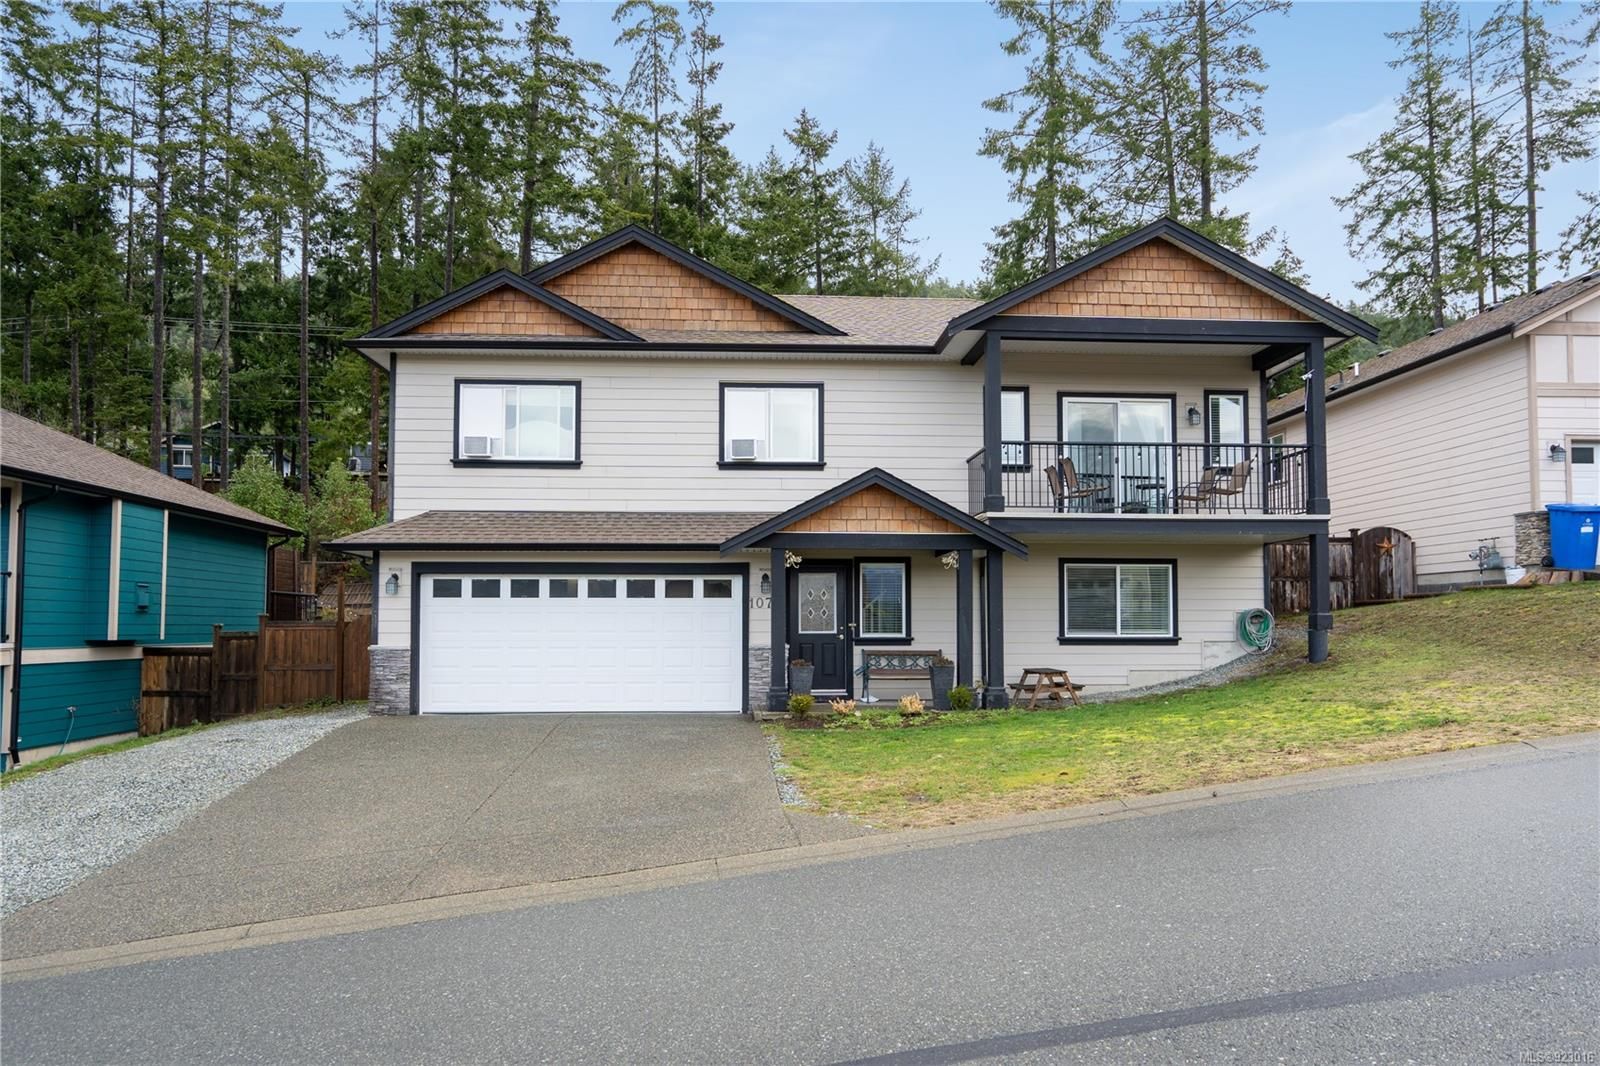 New property listed in ML Shawnigan, Malahat &amp; Area